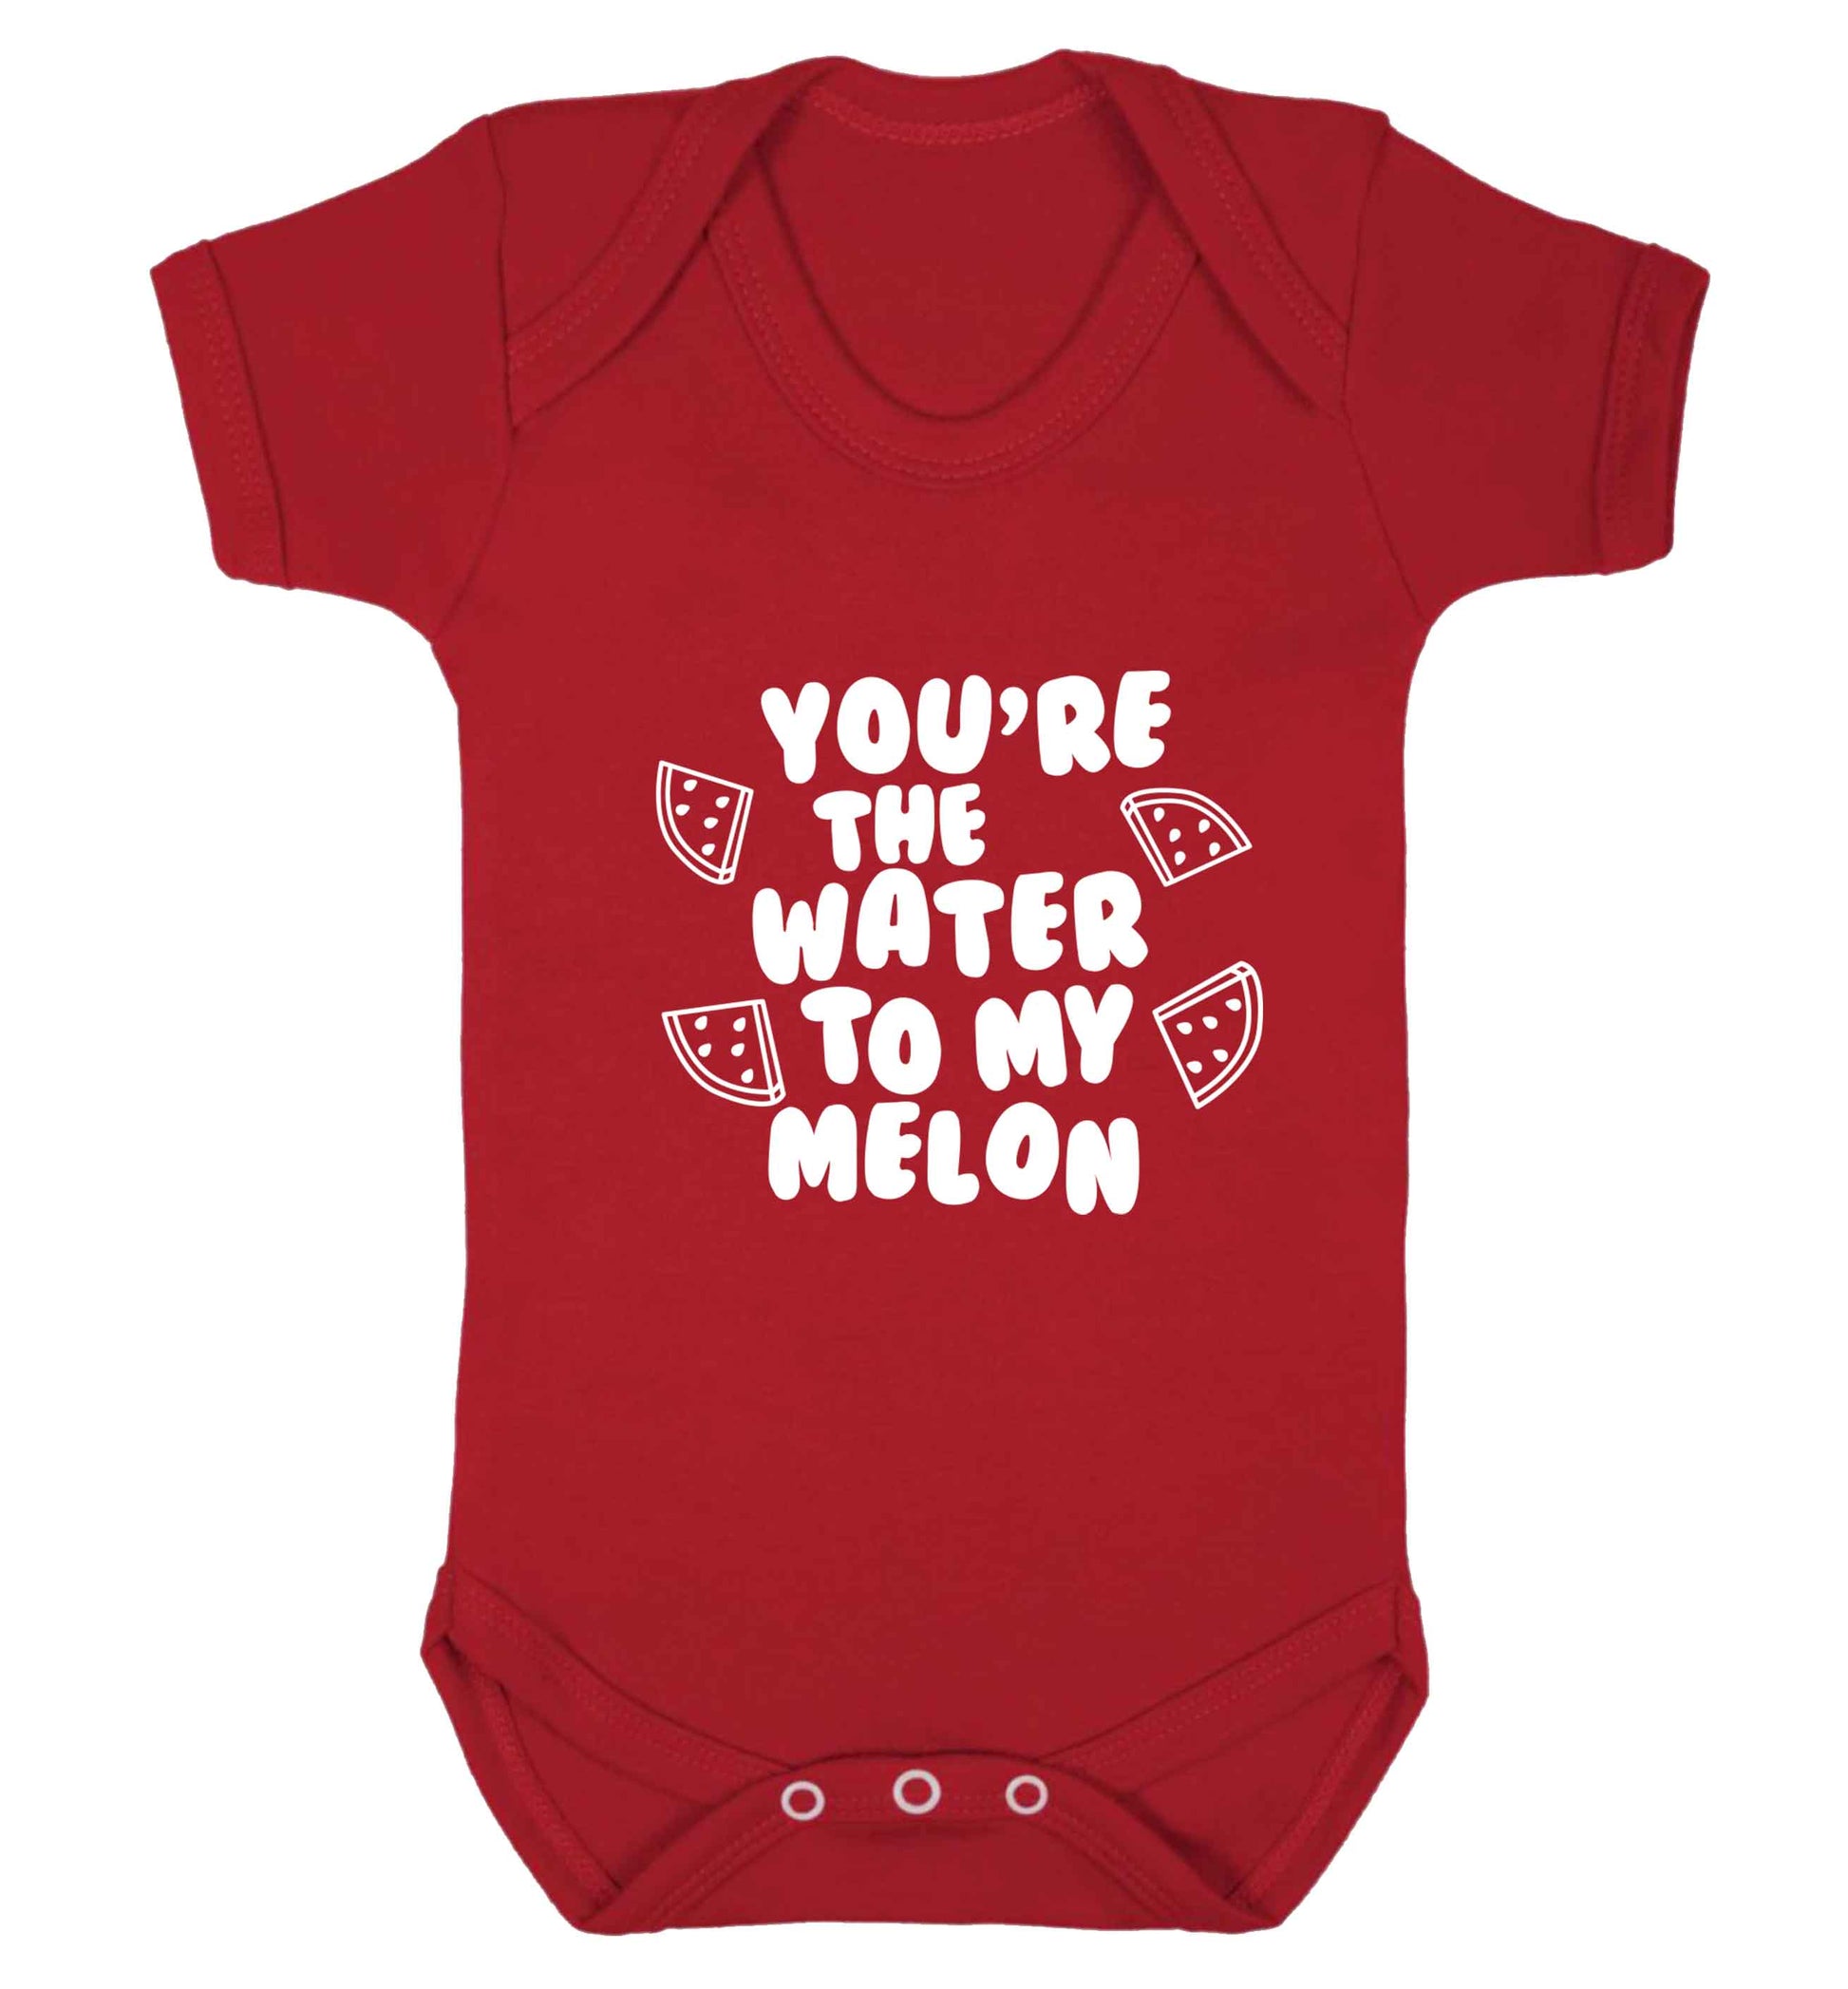 You're the water to my melon baby vest red 18-24 months